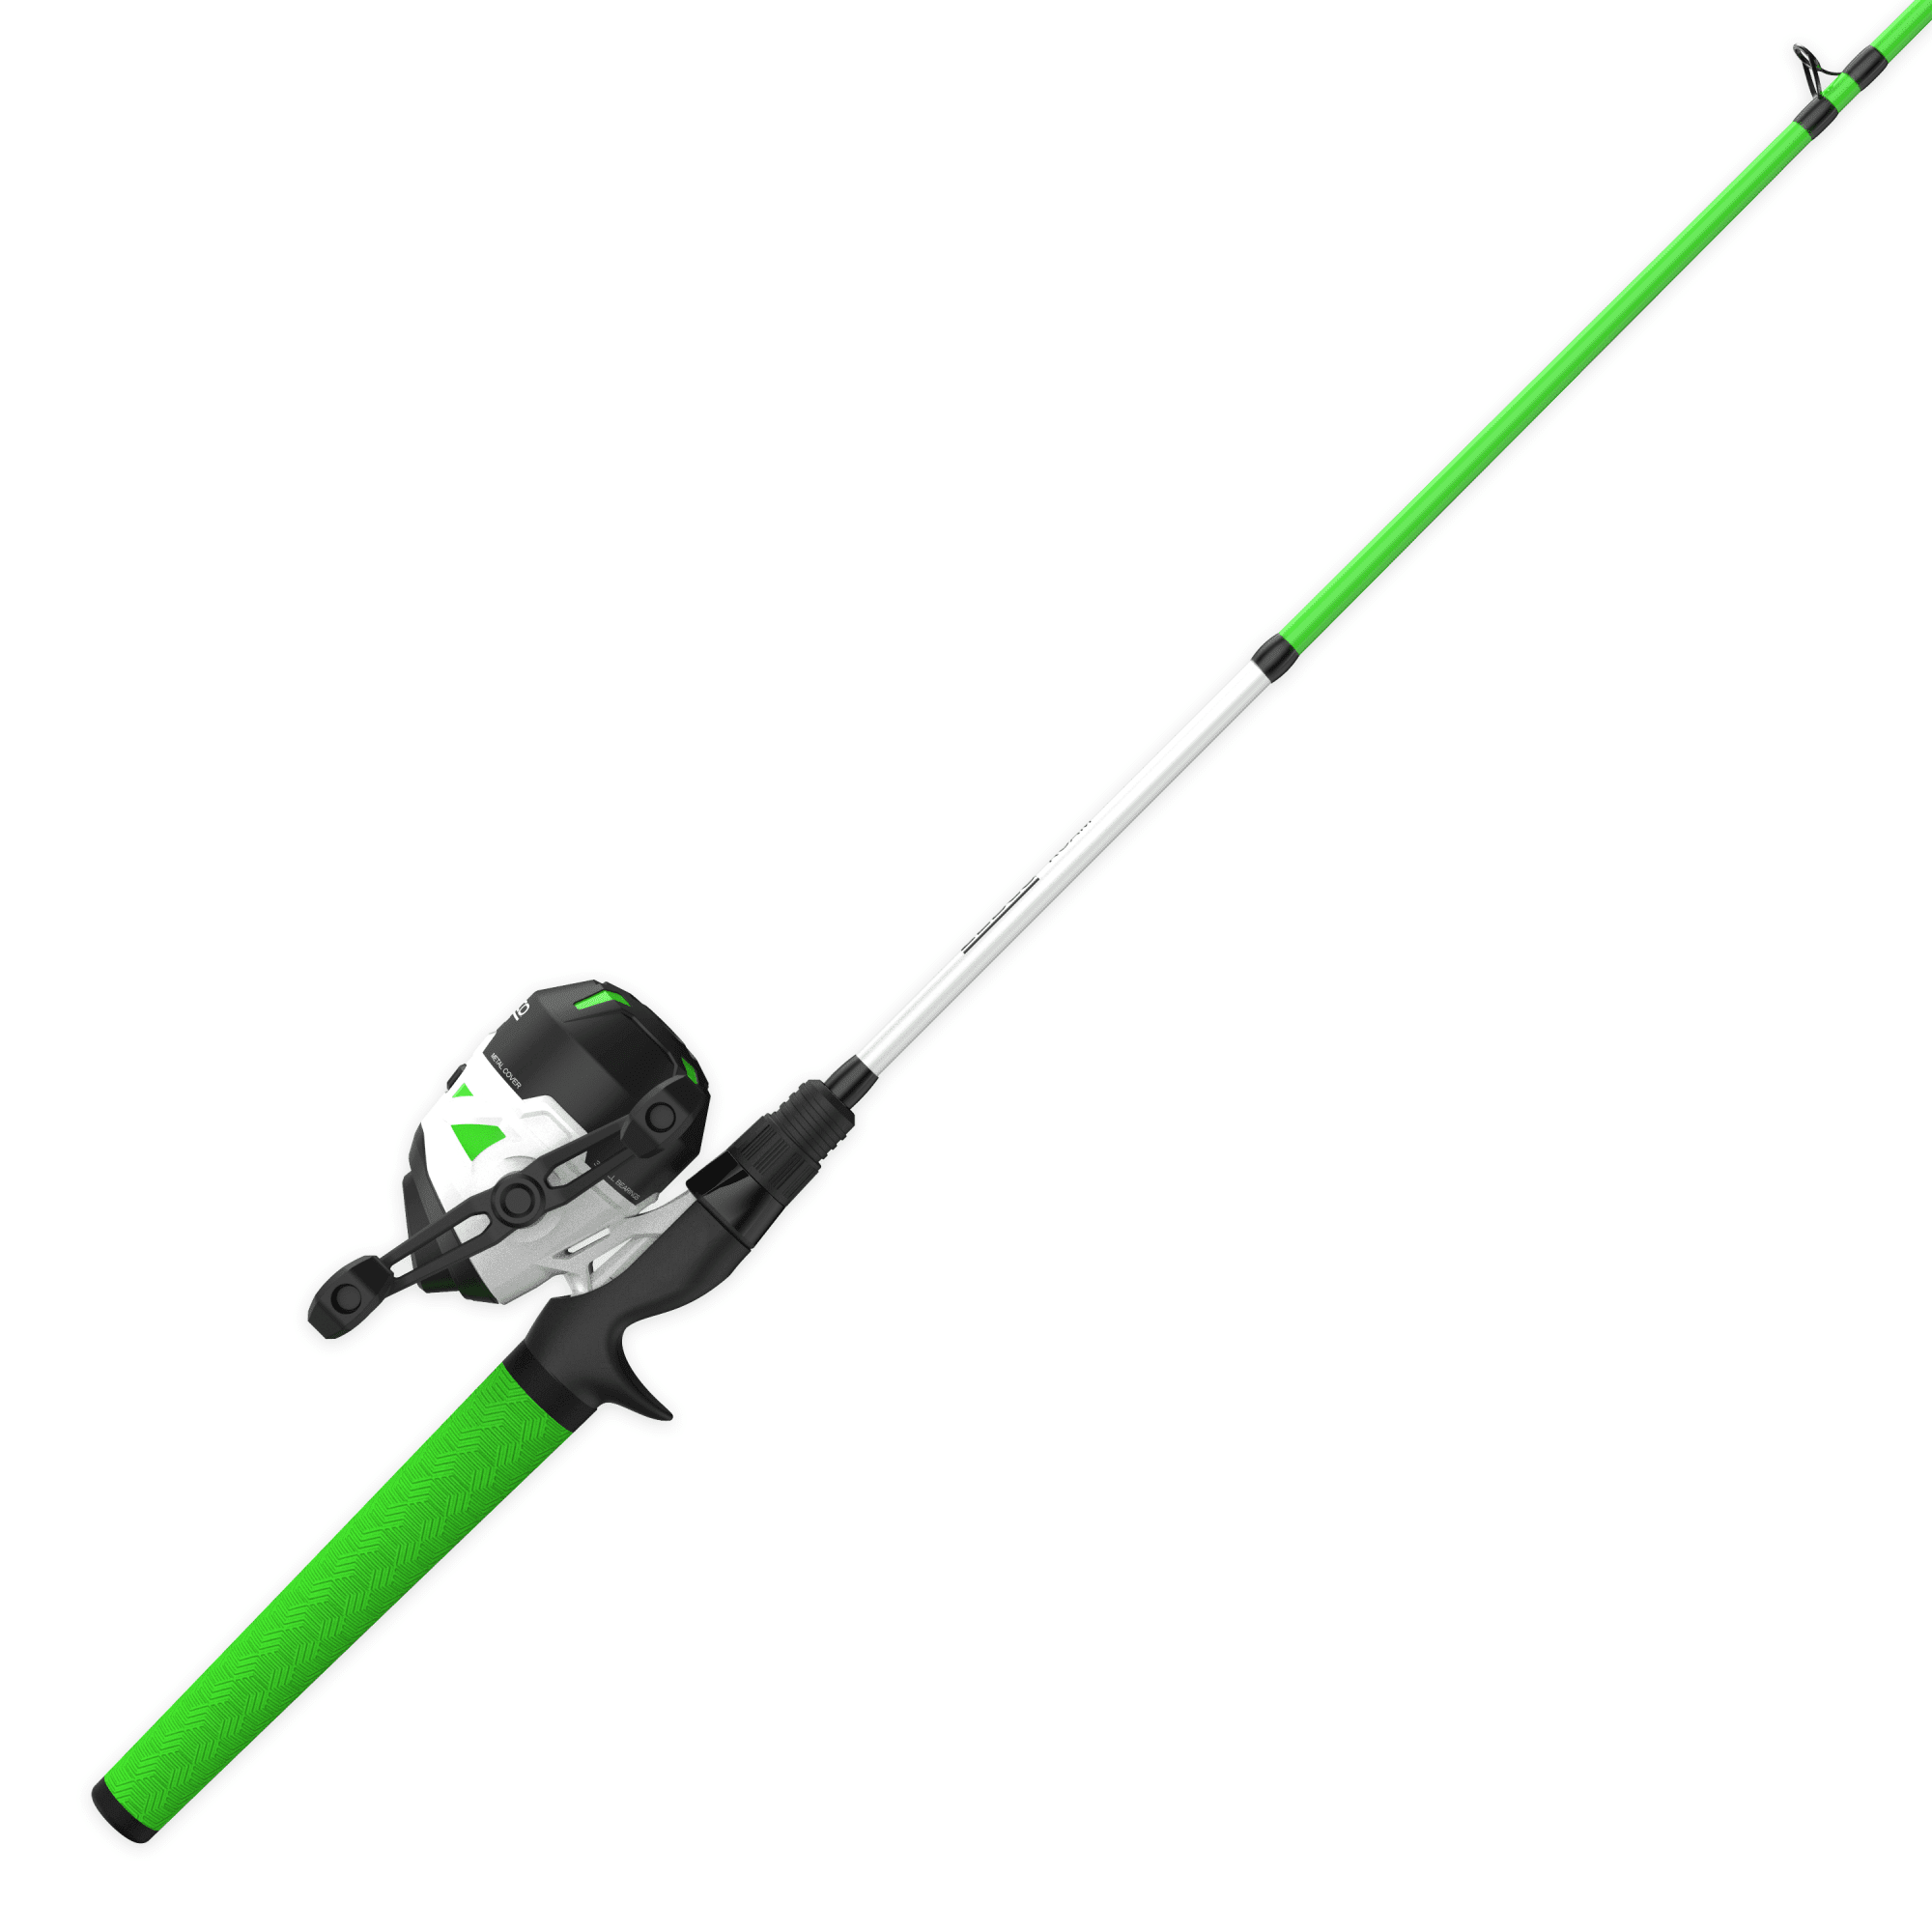 Zebco Roam 30Z 662M Spinning Rod and Reel Combo Pink - Corlane